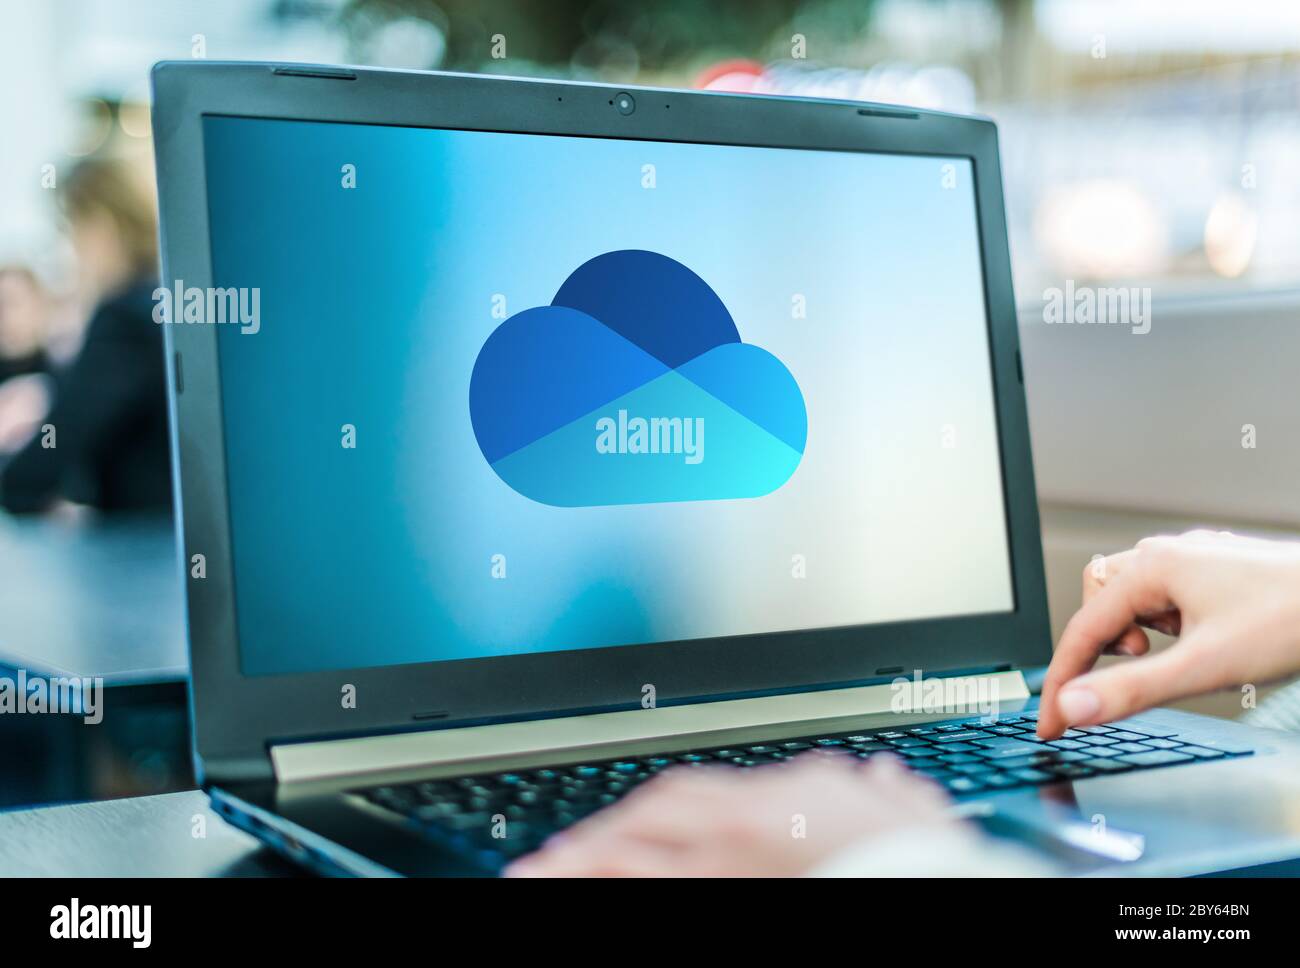 POZNAN, POL - APR 24, 2020: Laptop computer displaying logo of Microsoft OneDrive, a file hosting service and synchronization service operated by Micr Stock Photo